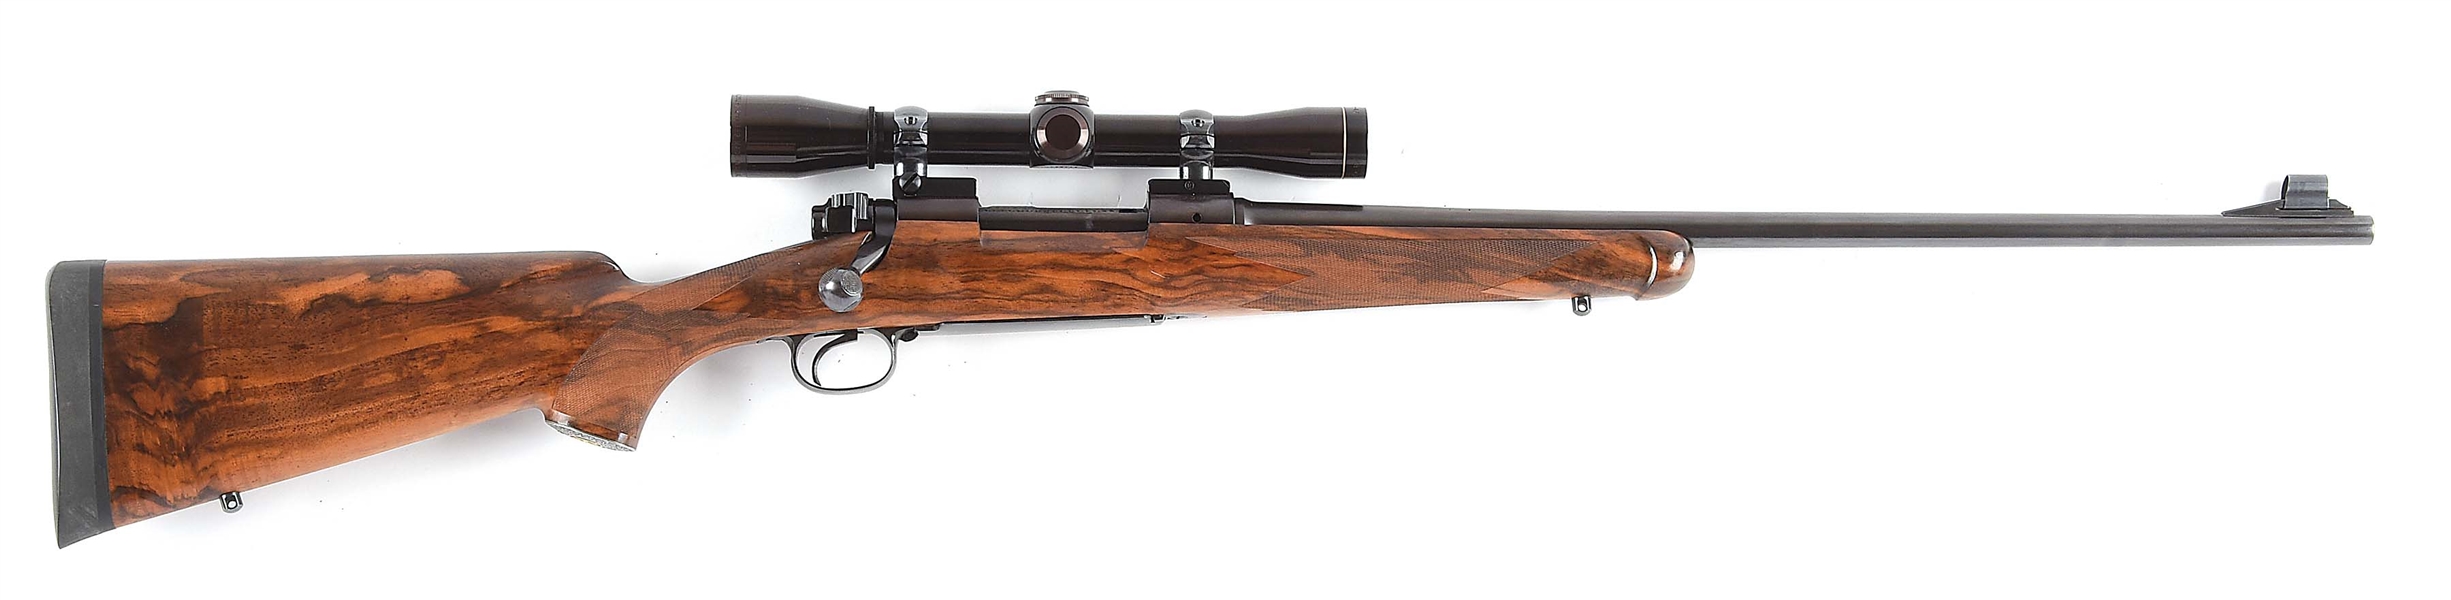 (C) CUSTOM STOCKED PRE-64 WINCHESTER MODEL 70 FEATHERWEIGHT .30-06 BOLT ACTION RIFLE (1953).